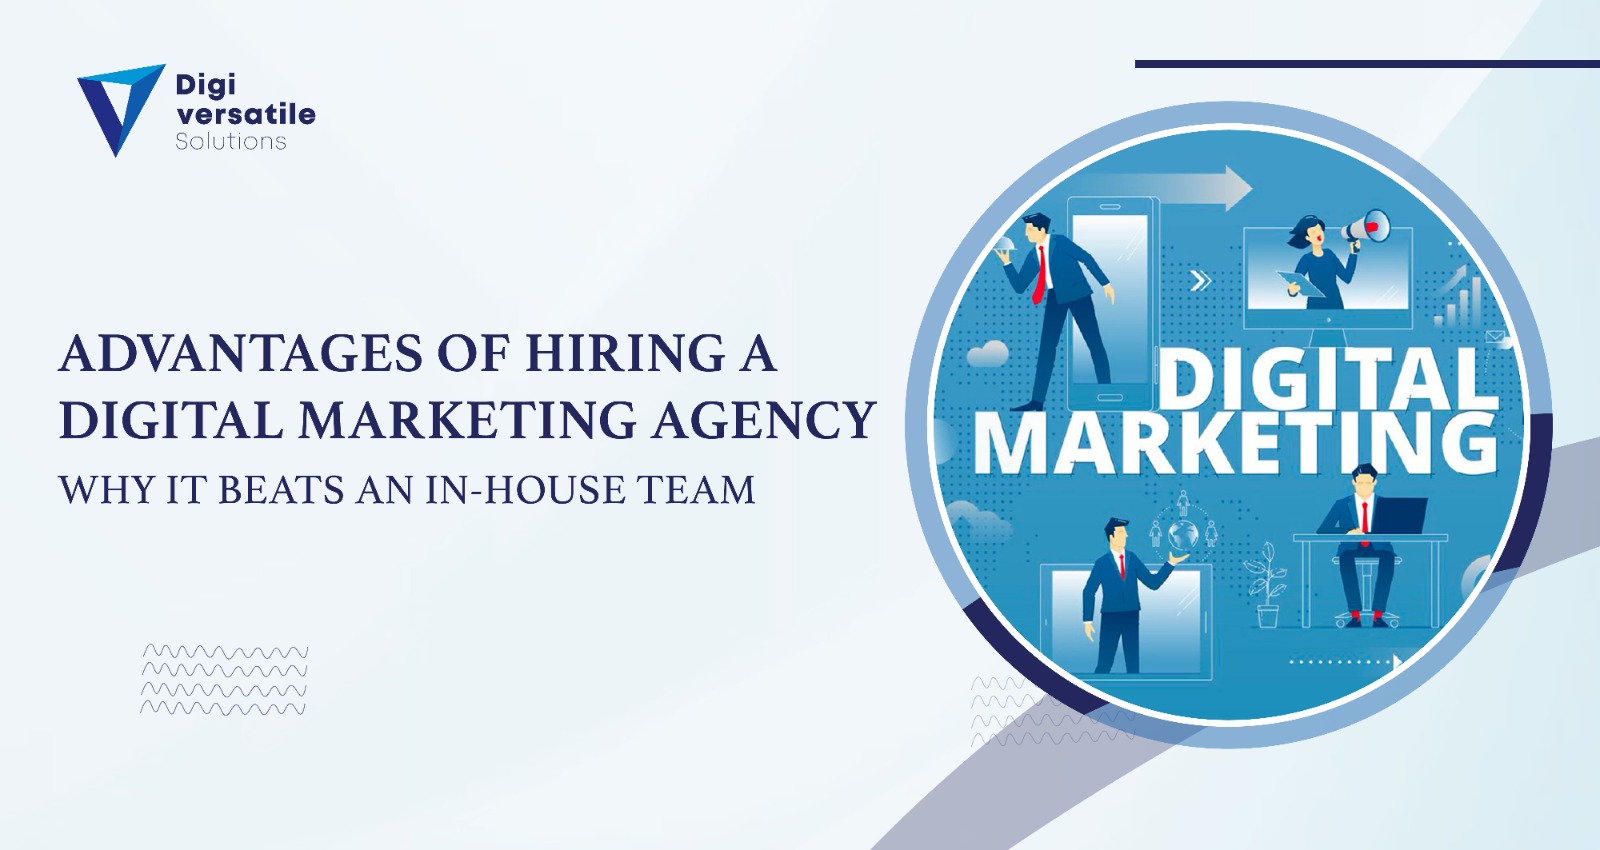 Advantages-of-Hiring-a-Digital-Marketing-Agency-Why-It-Beats-an-In-House-Team-1.jpeg